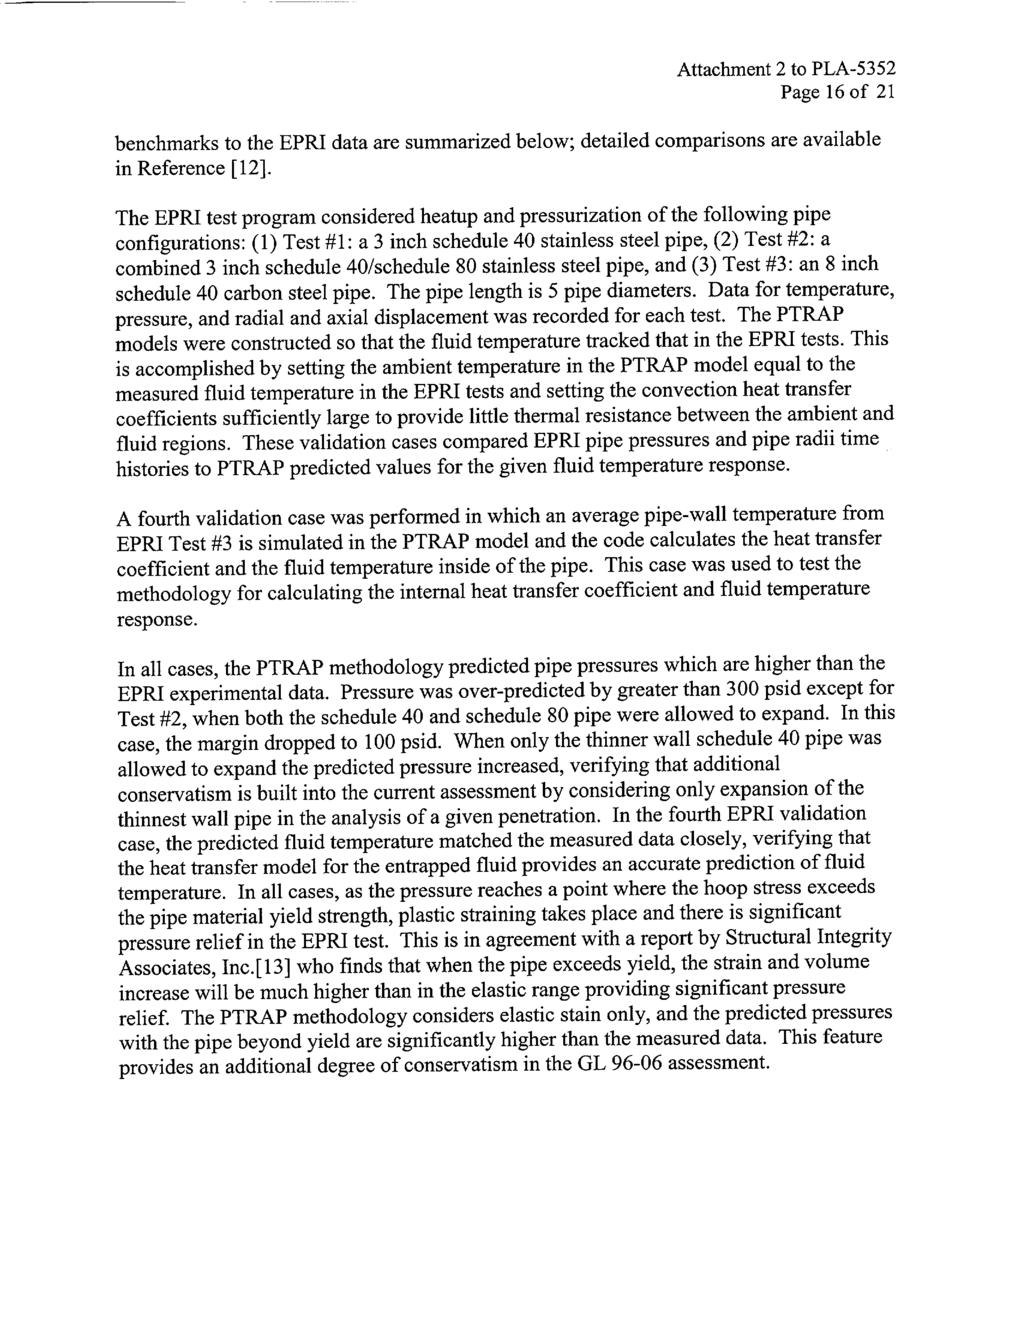 Attachment 2 to PLA-5352 Page 16 of 21 benchmarks to the EPRI data are summarized below; detailed comparisons are available in Reference [ 12].